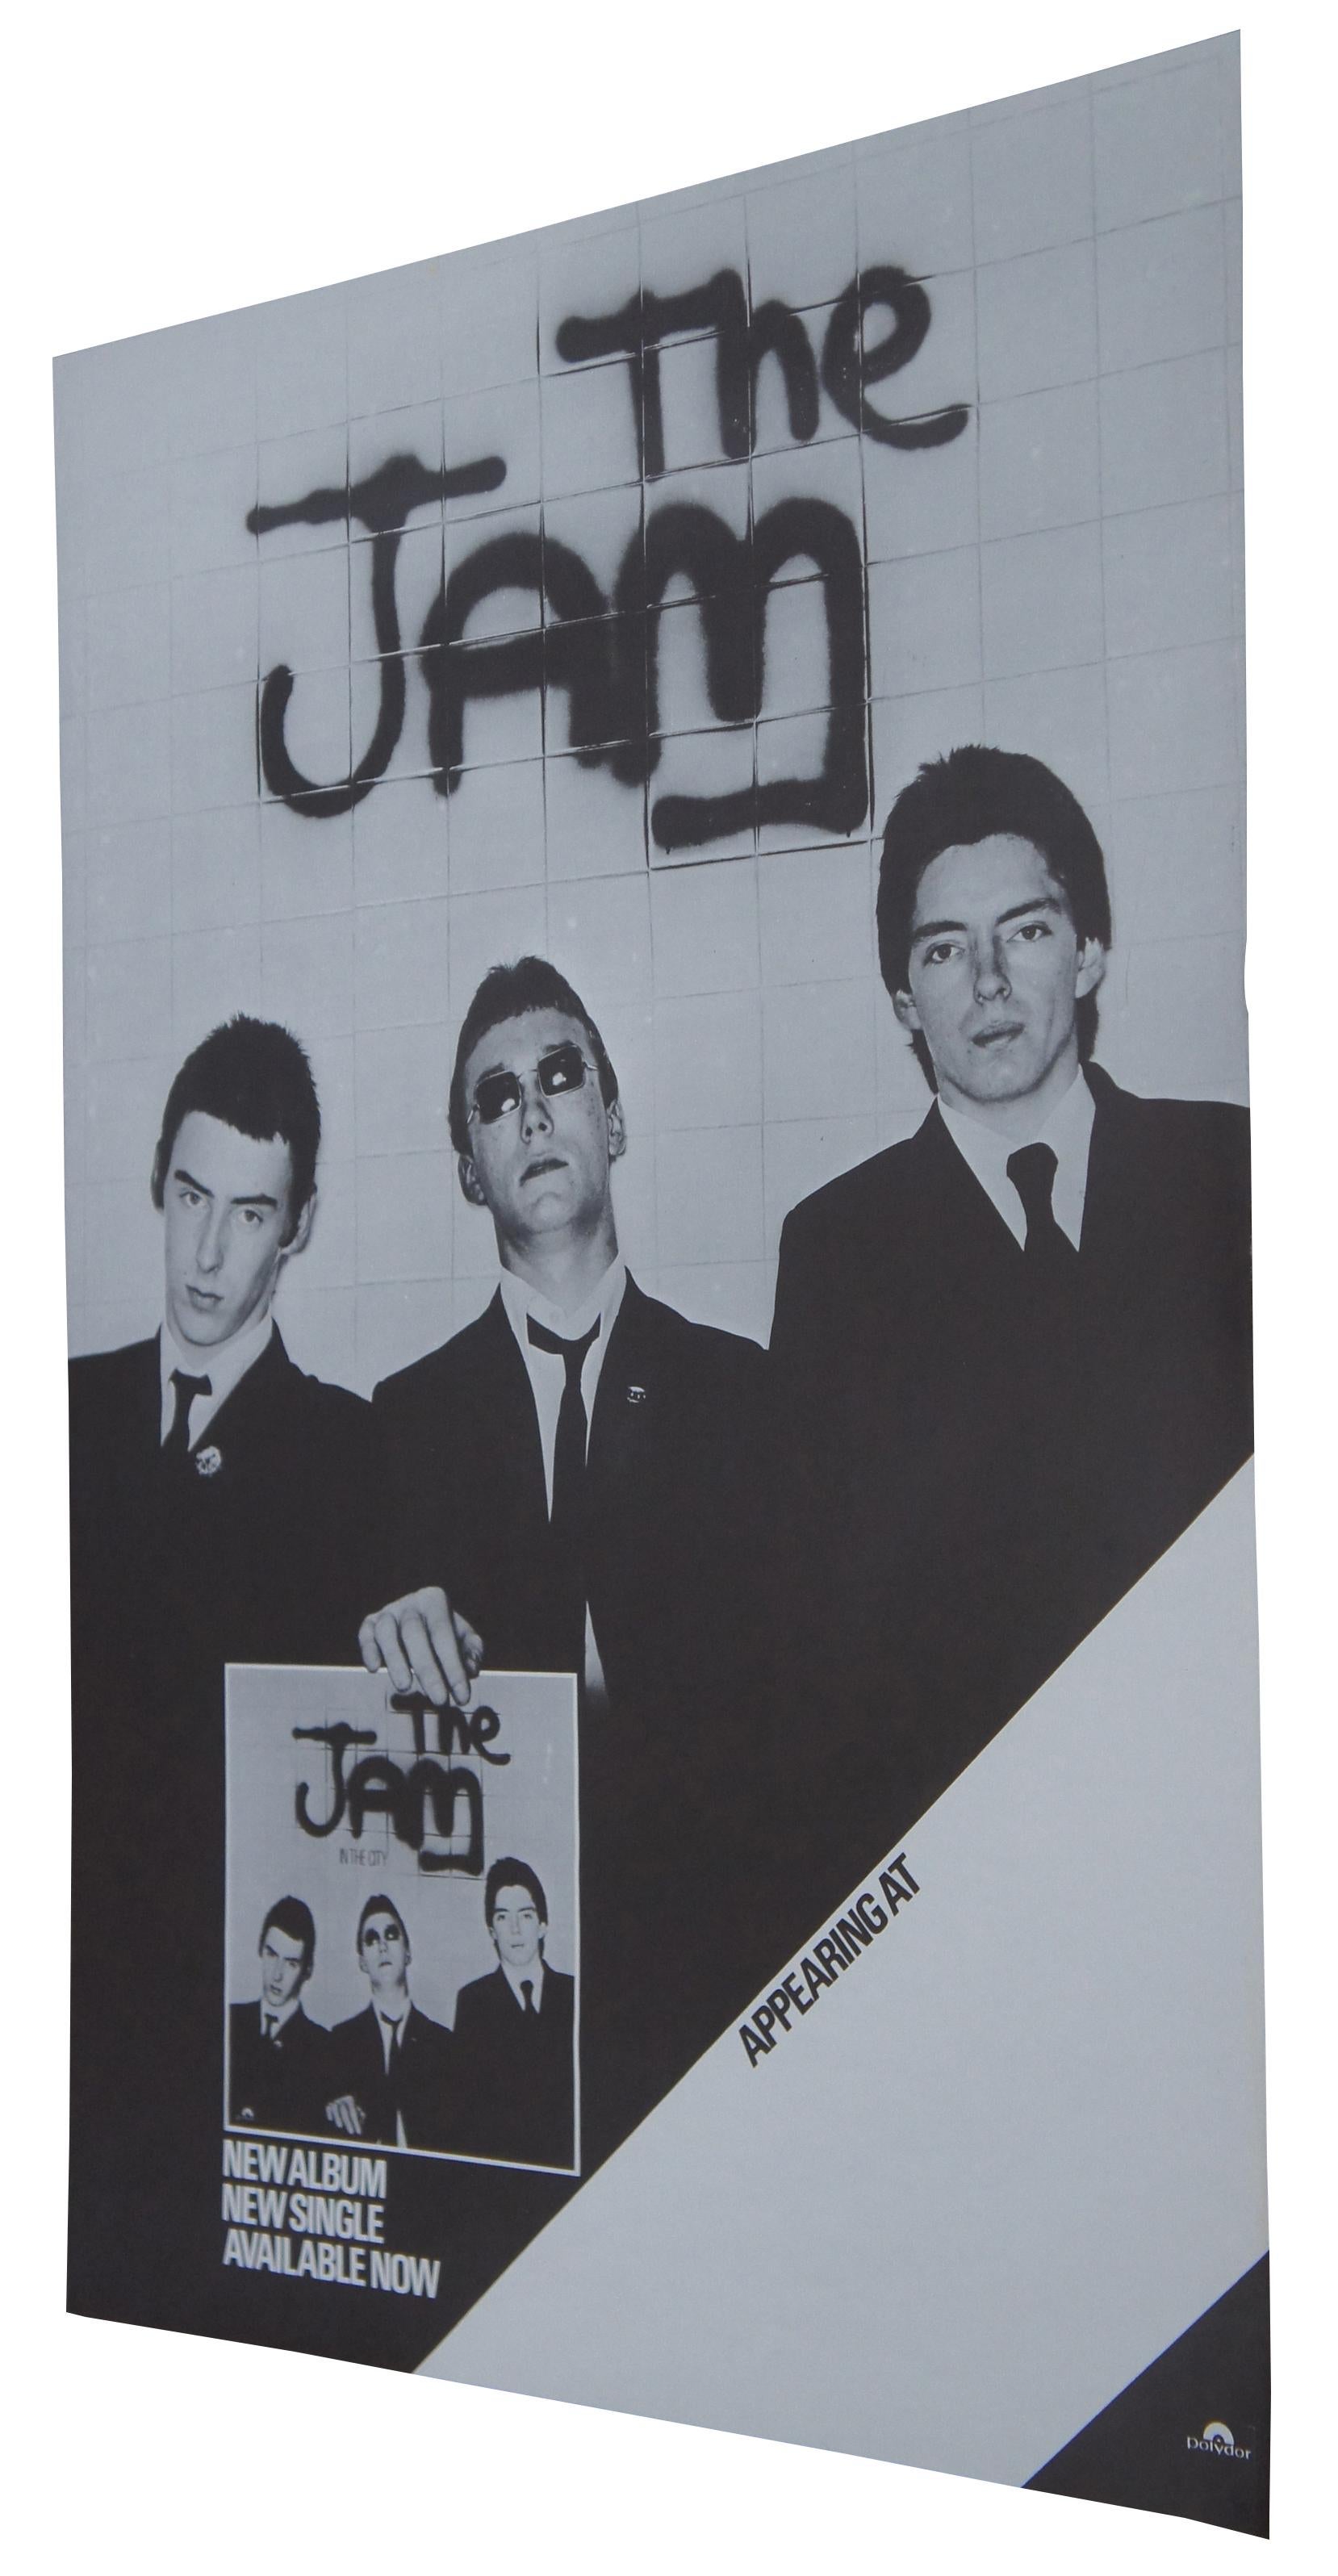 2 available - In the City is the debut studio album by British mod revival band The Jam. Released in May 1977 by Polydor Records, the album reached No. 20 on the UK Albums Chart. The album features the band's debut single and title track 